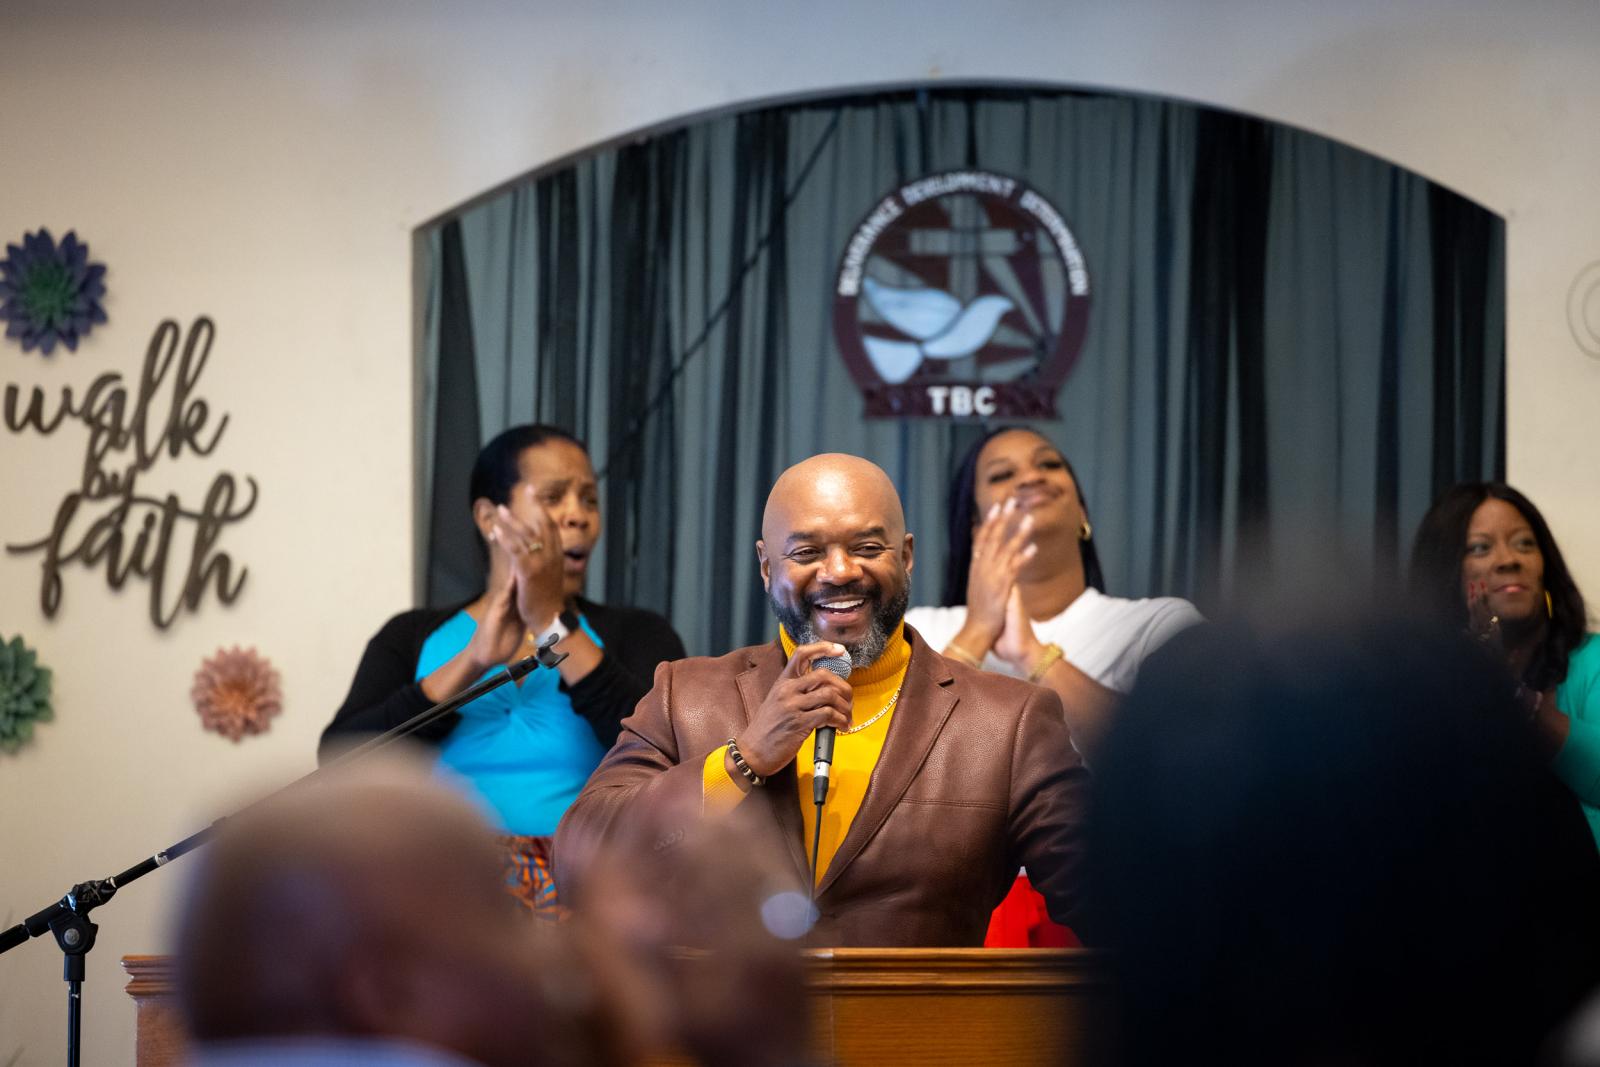 Pastor Torie Russell